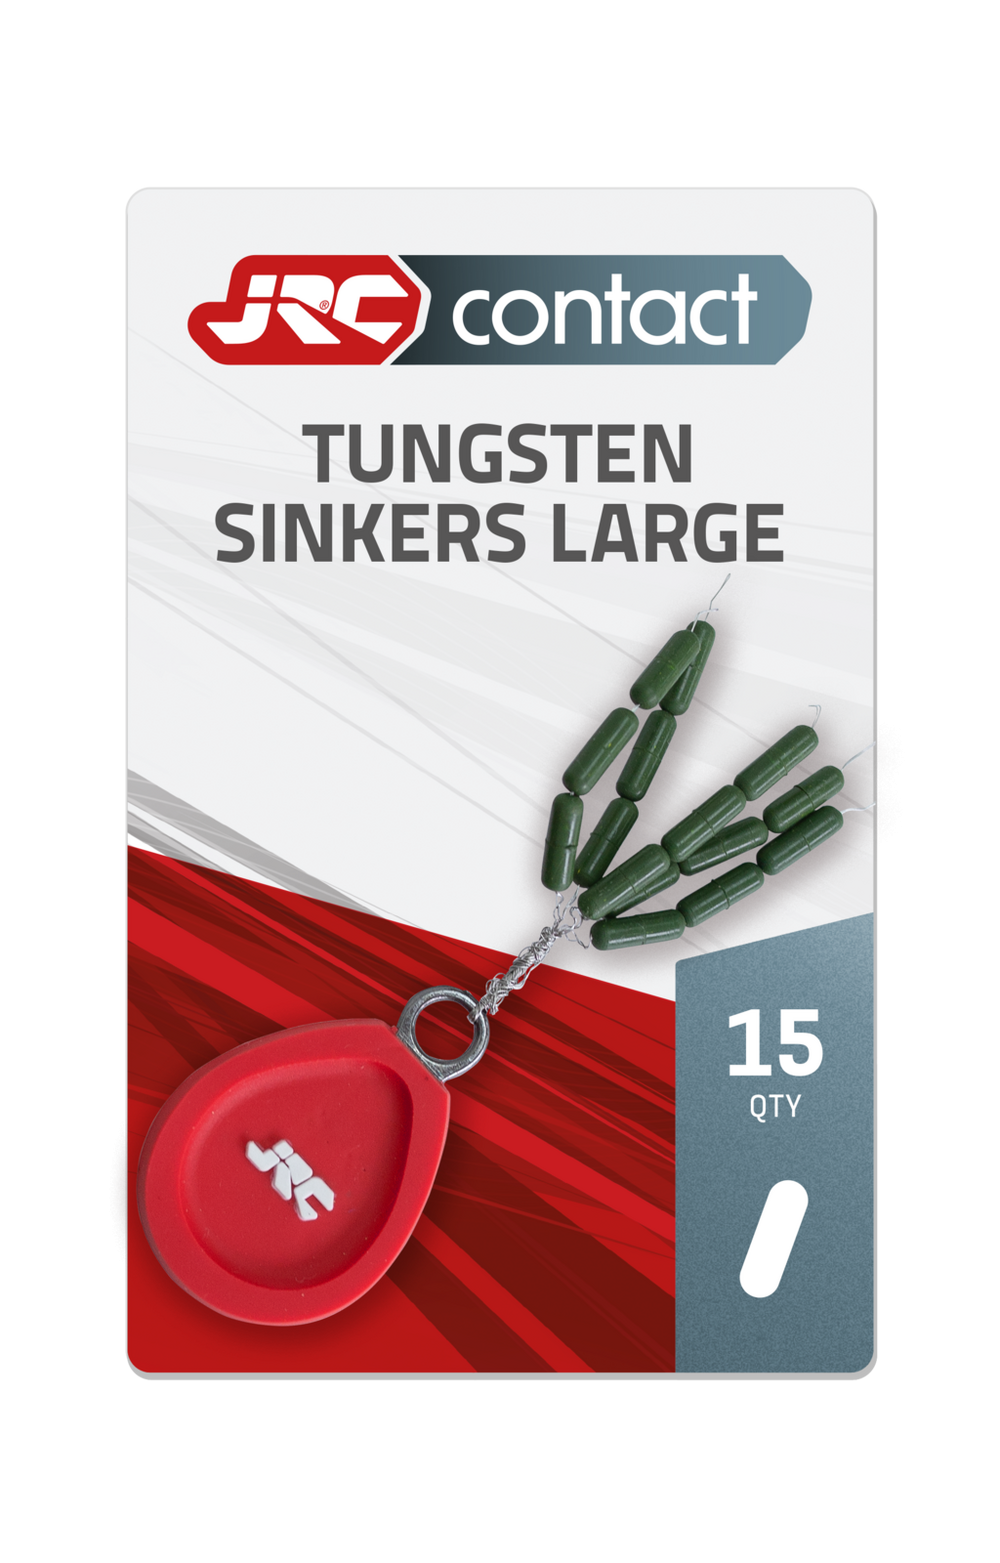 JRC Contact Tungsten Tubing Large